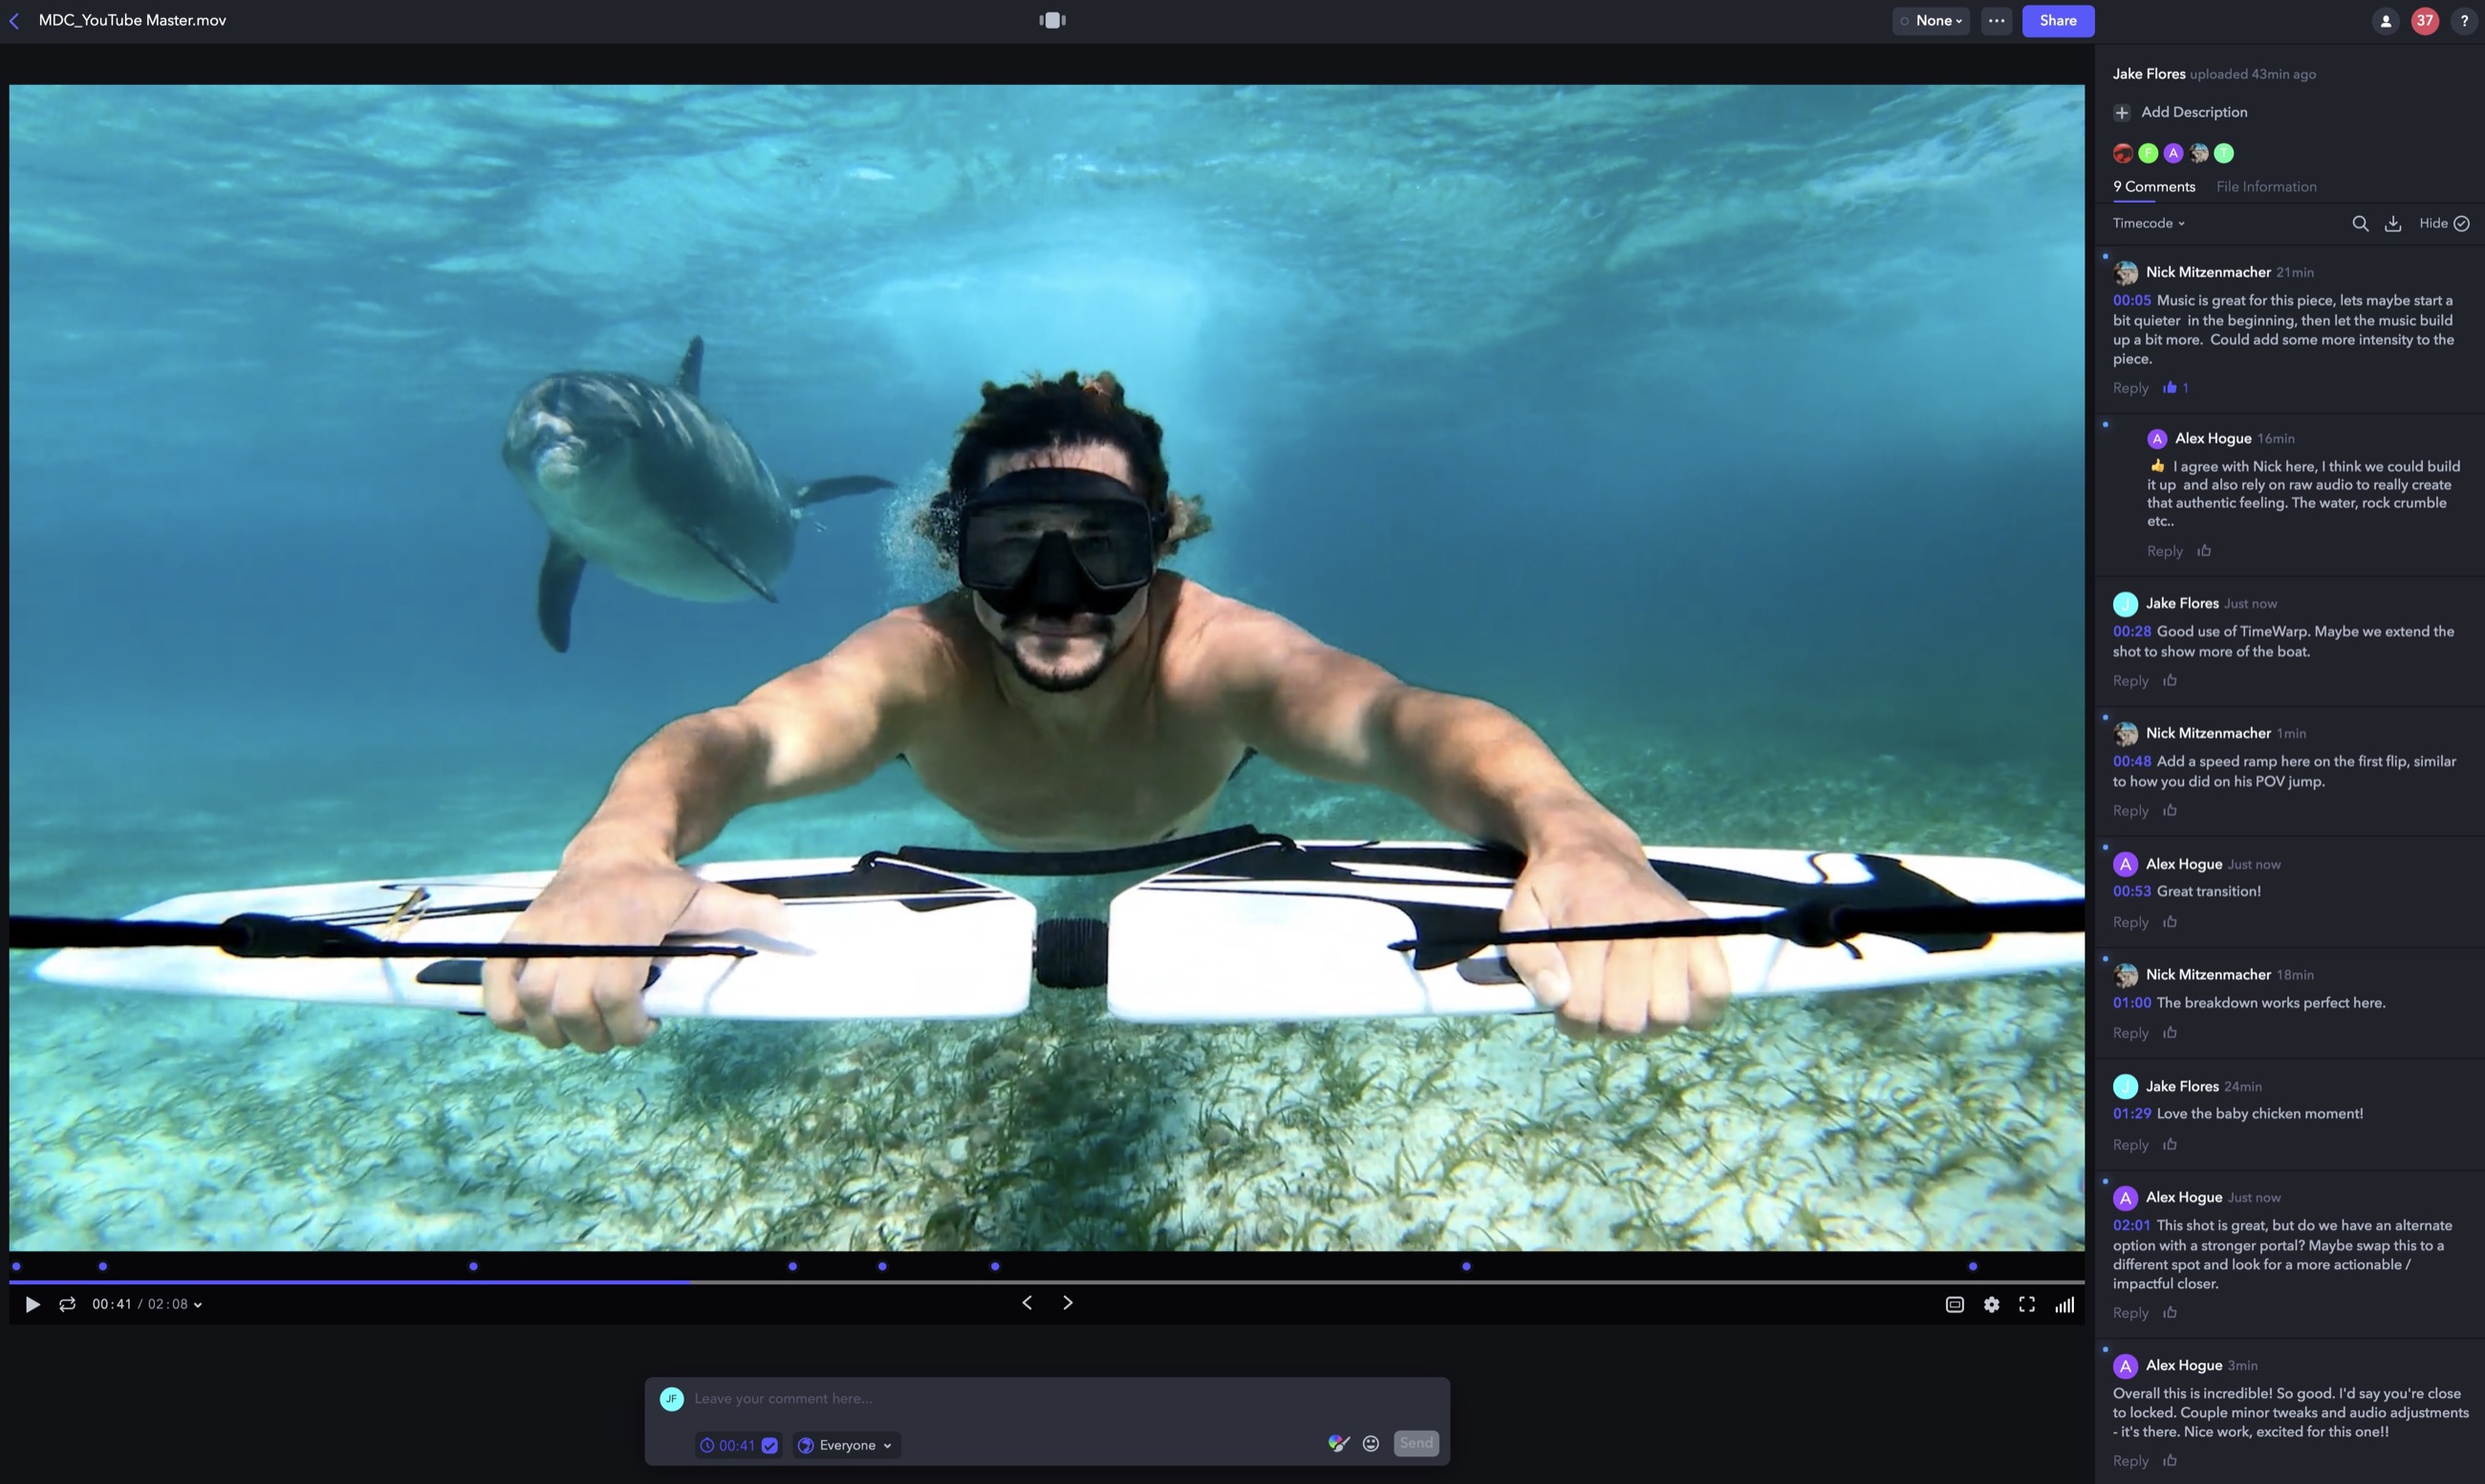 Gopro professional guide to filmmaking torrent download